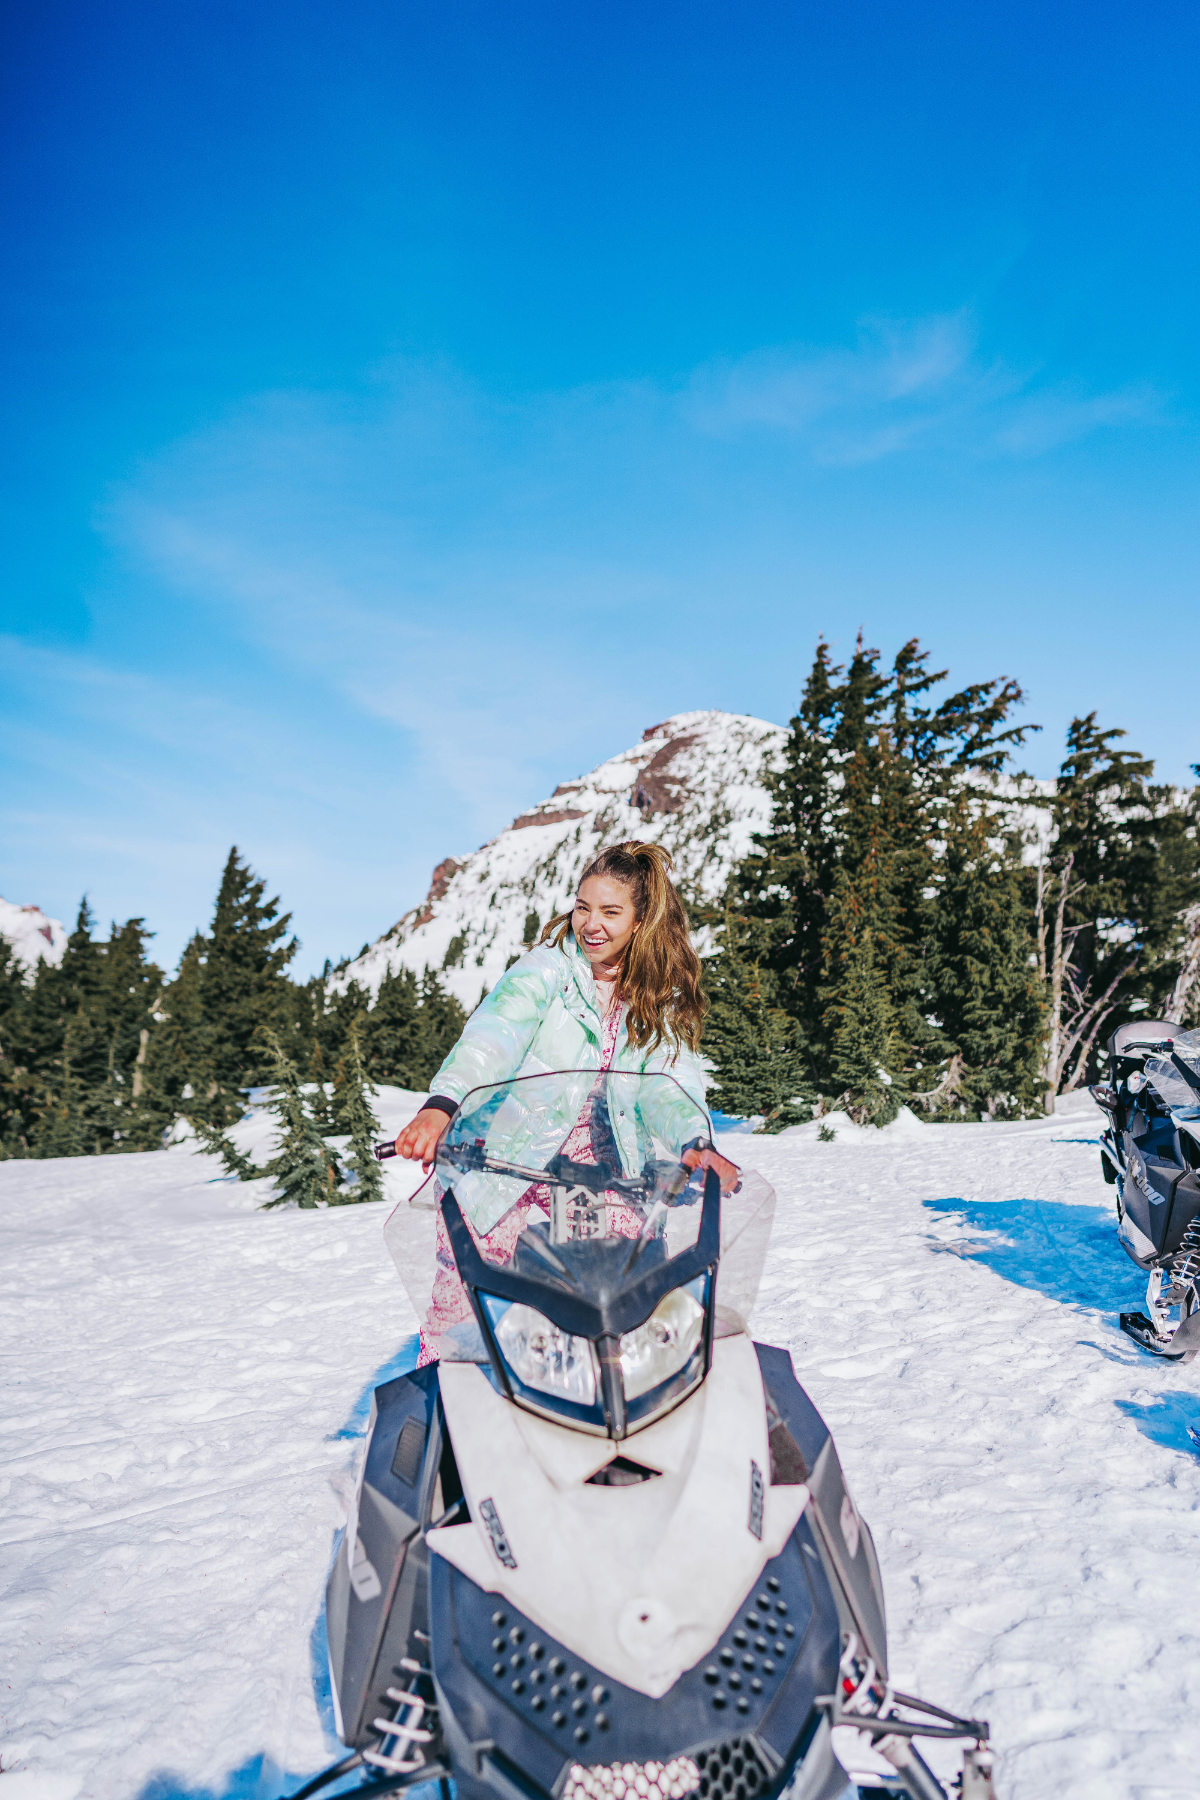 Things to do in bend Oregon: snowmobiling. Lauryncakes stands on a snowmobile in the middle of the Cascade Mountain range